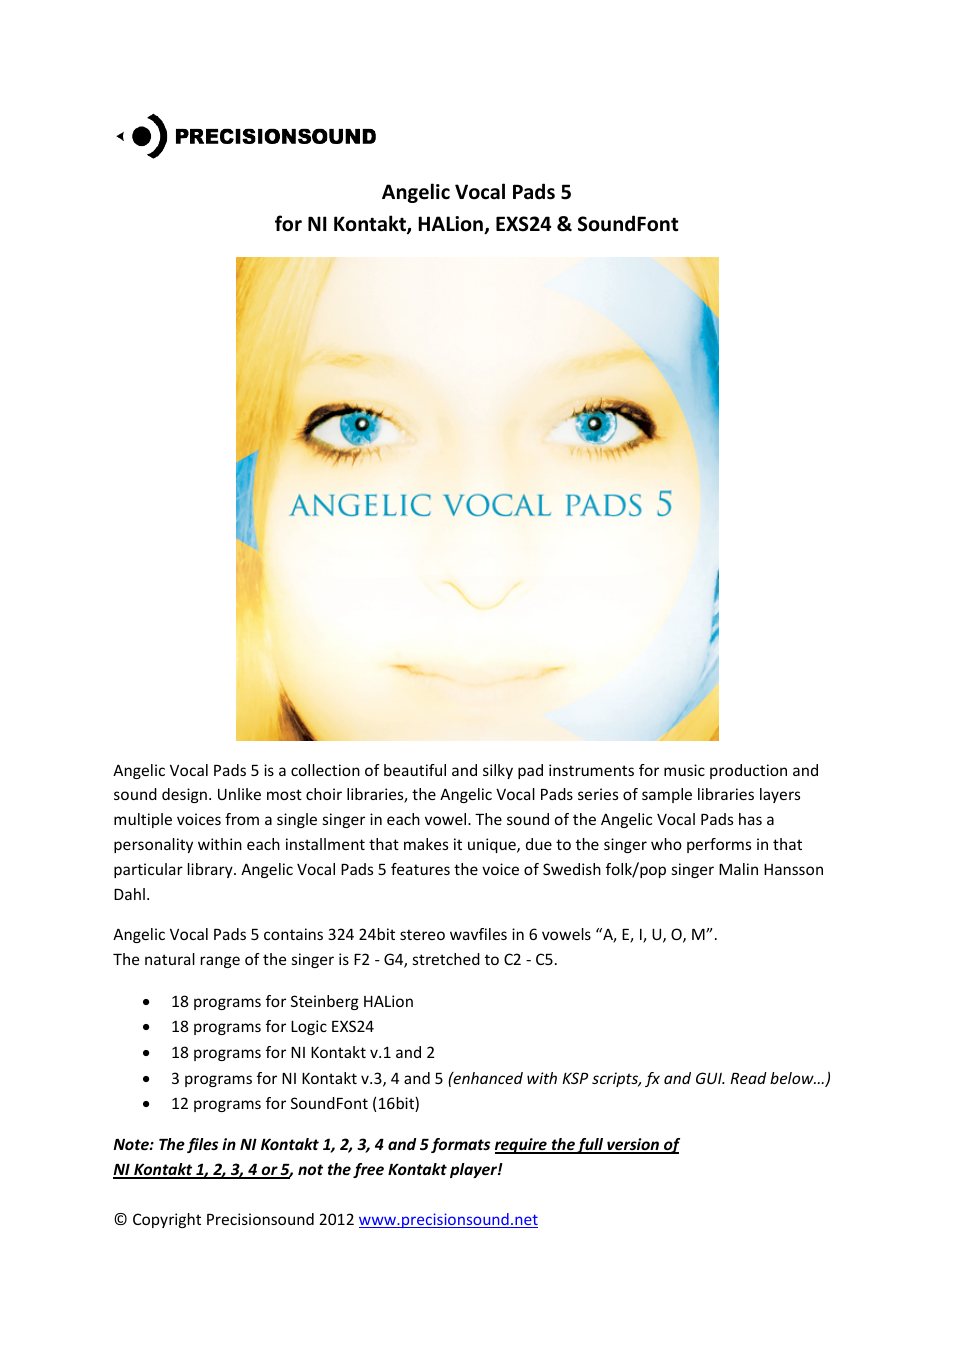 Angelic Vocal Pads 5